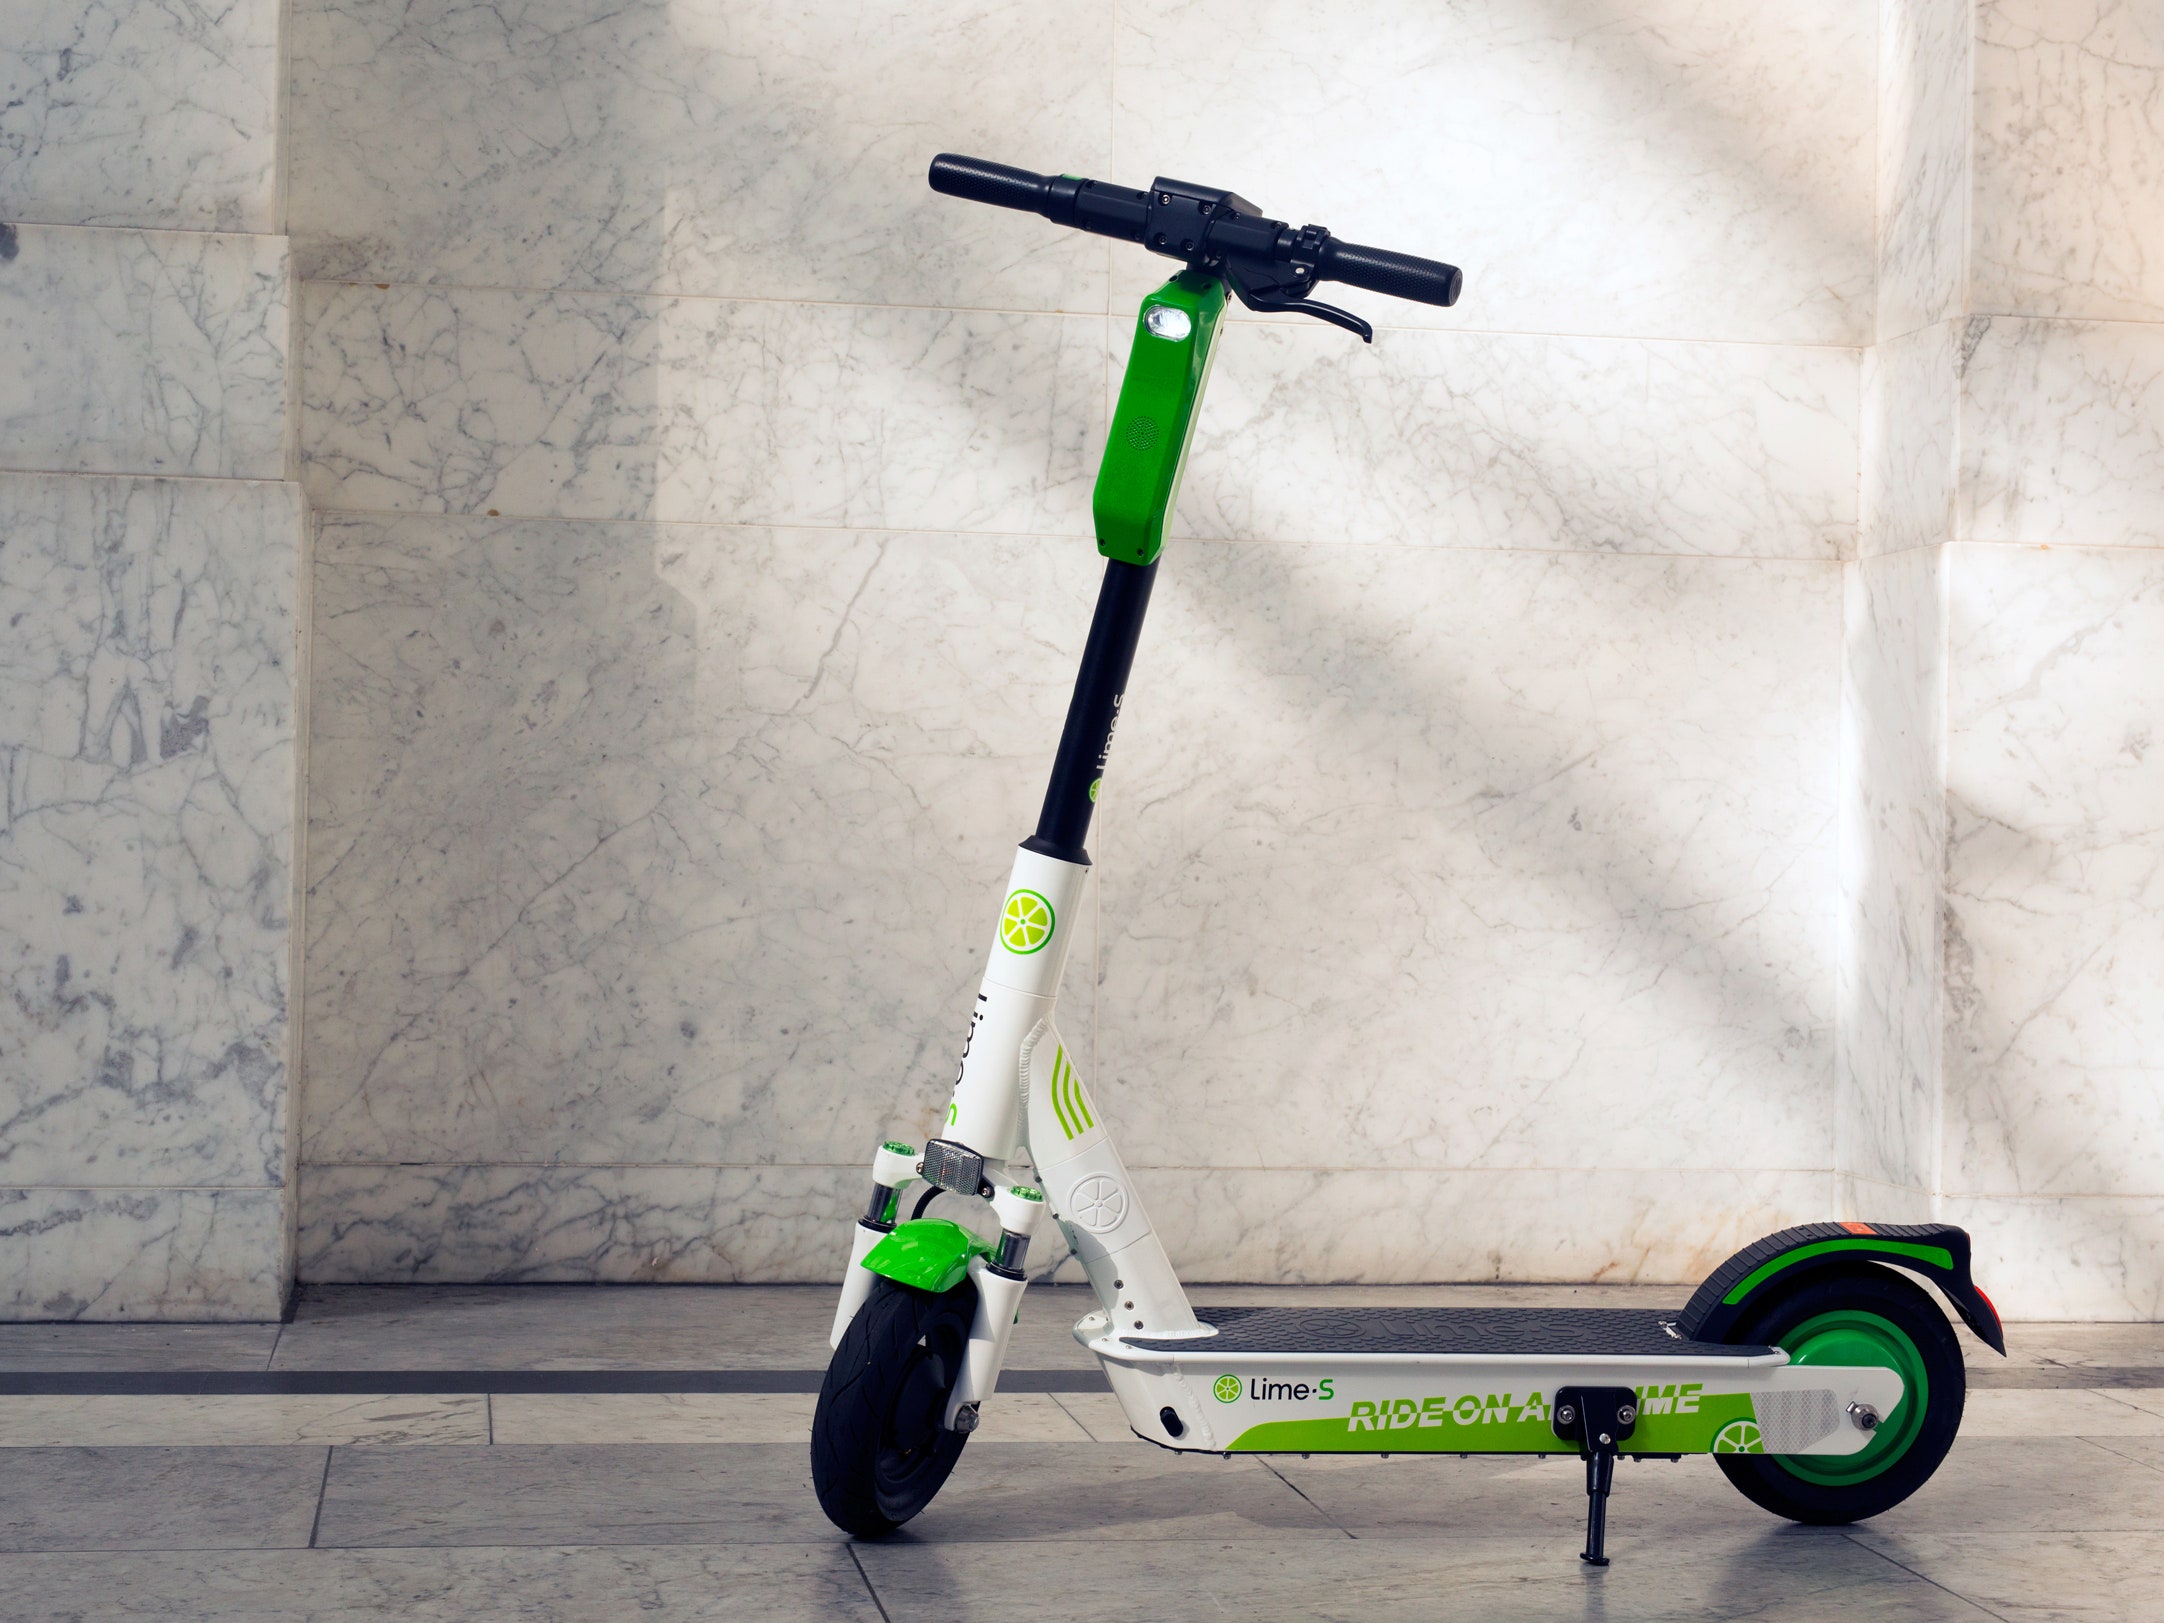 Lime Scooter Promo Codes - wide 8